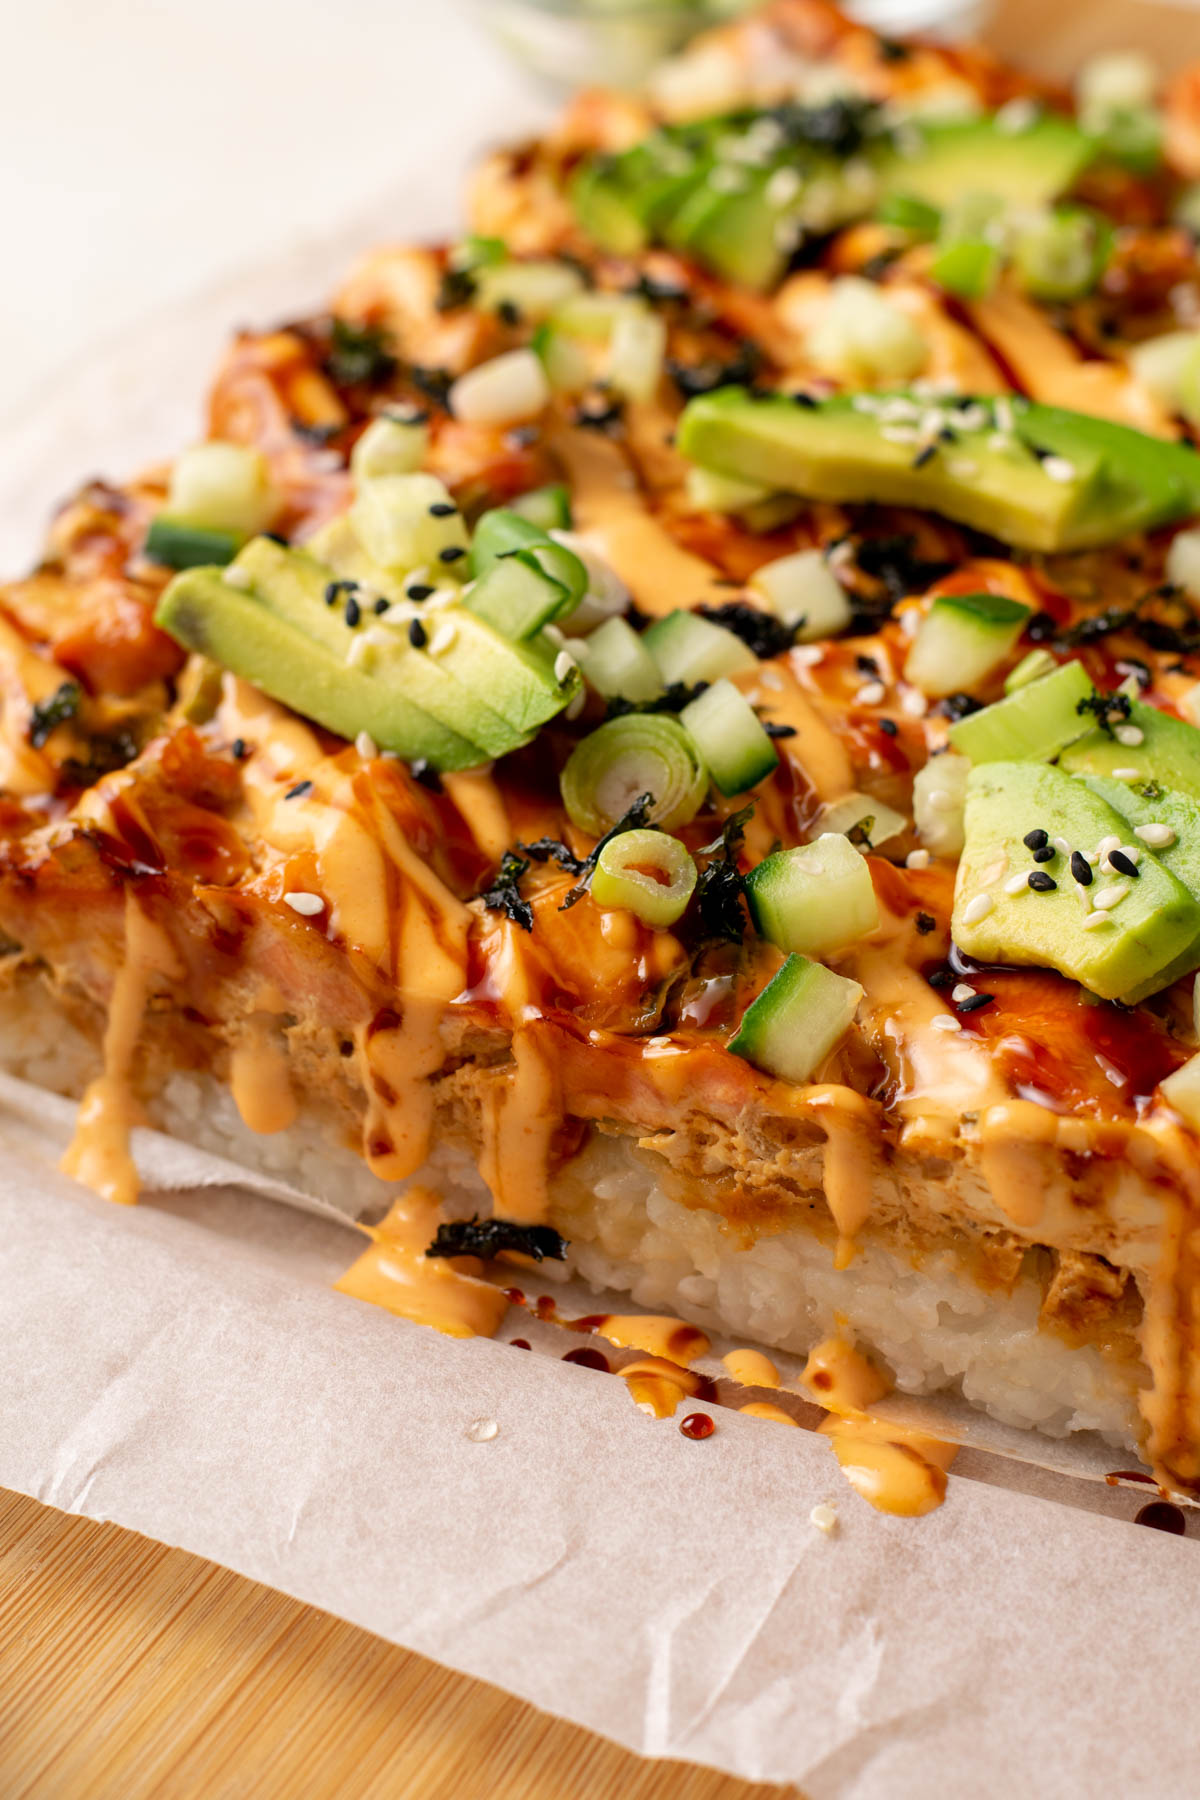 salmon sushi bake topped with avocado and drizzled in spicy mayo.